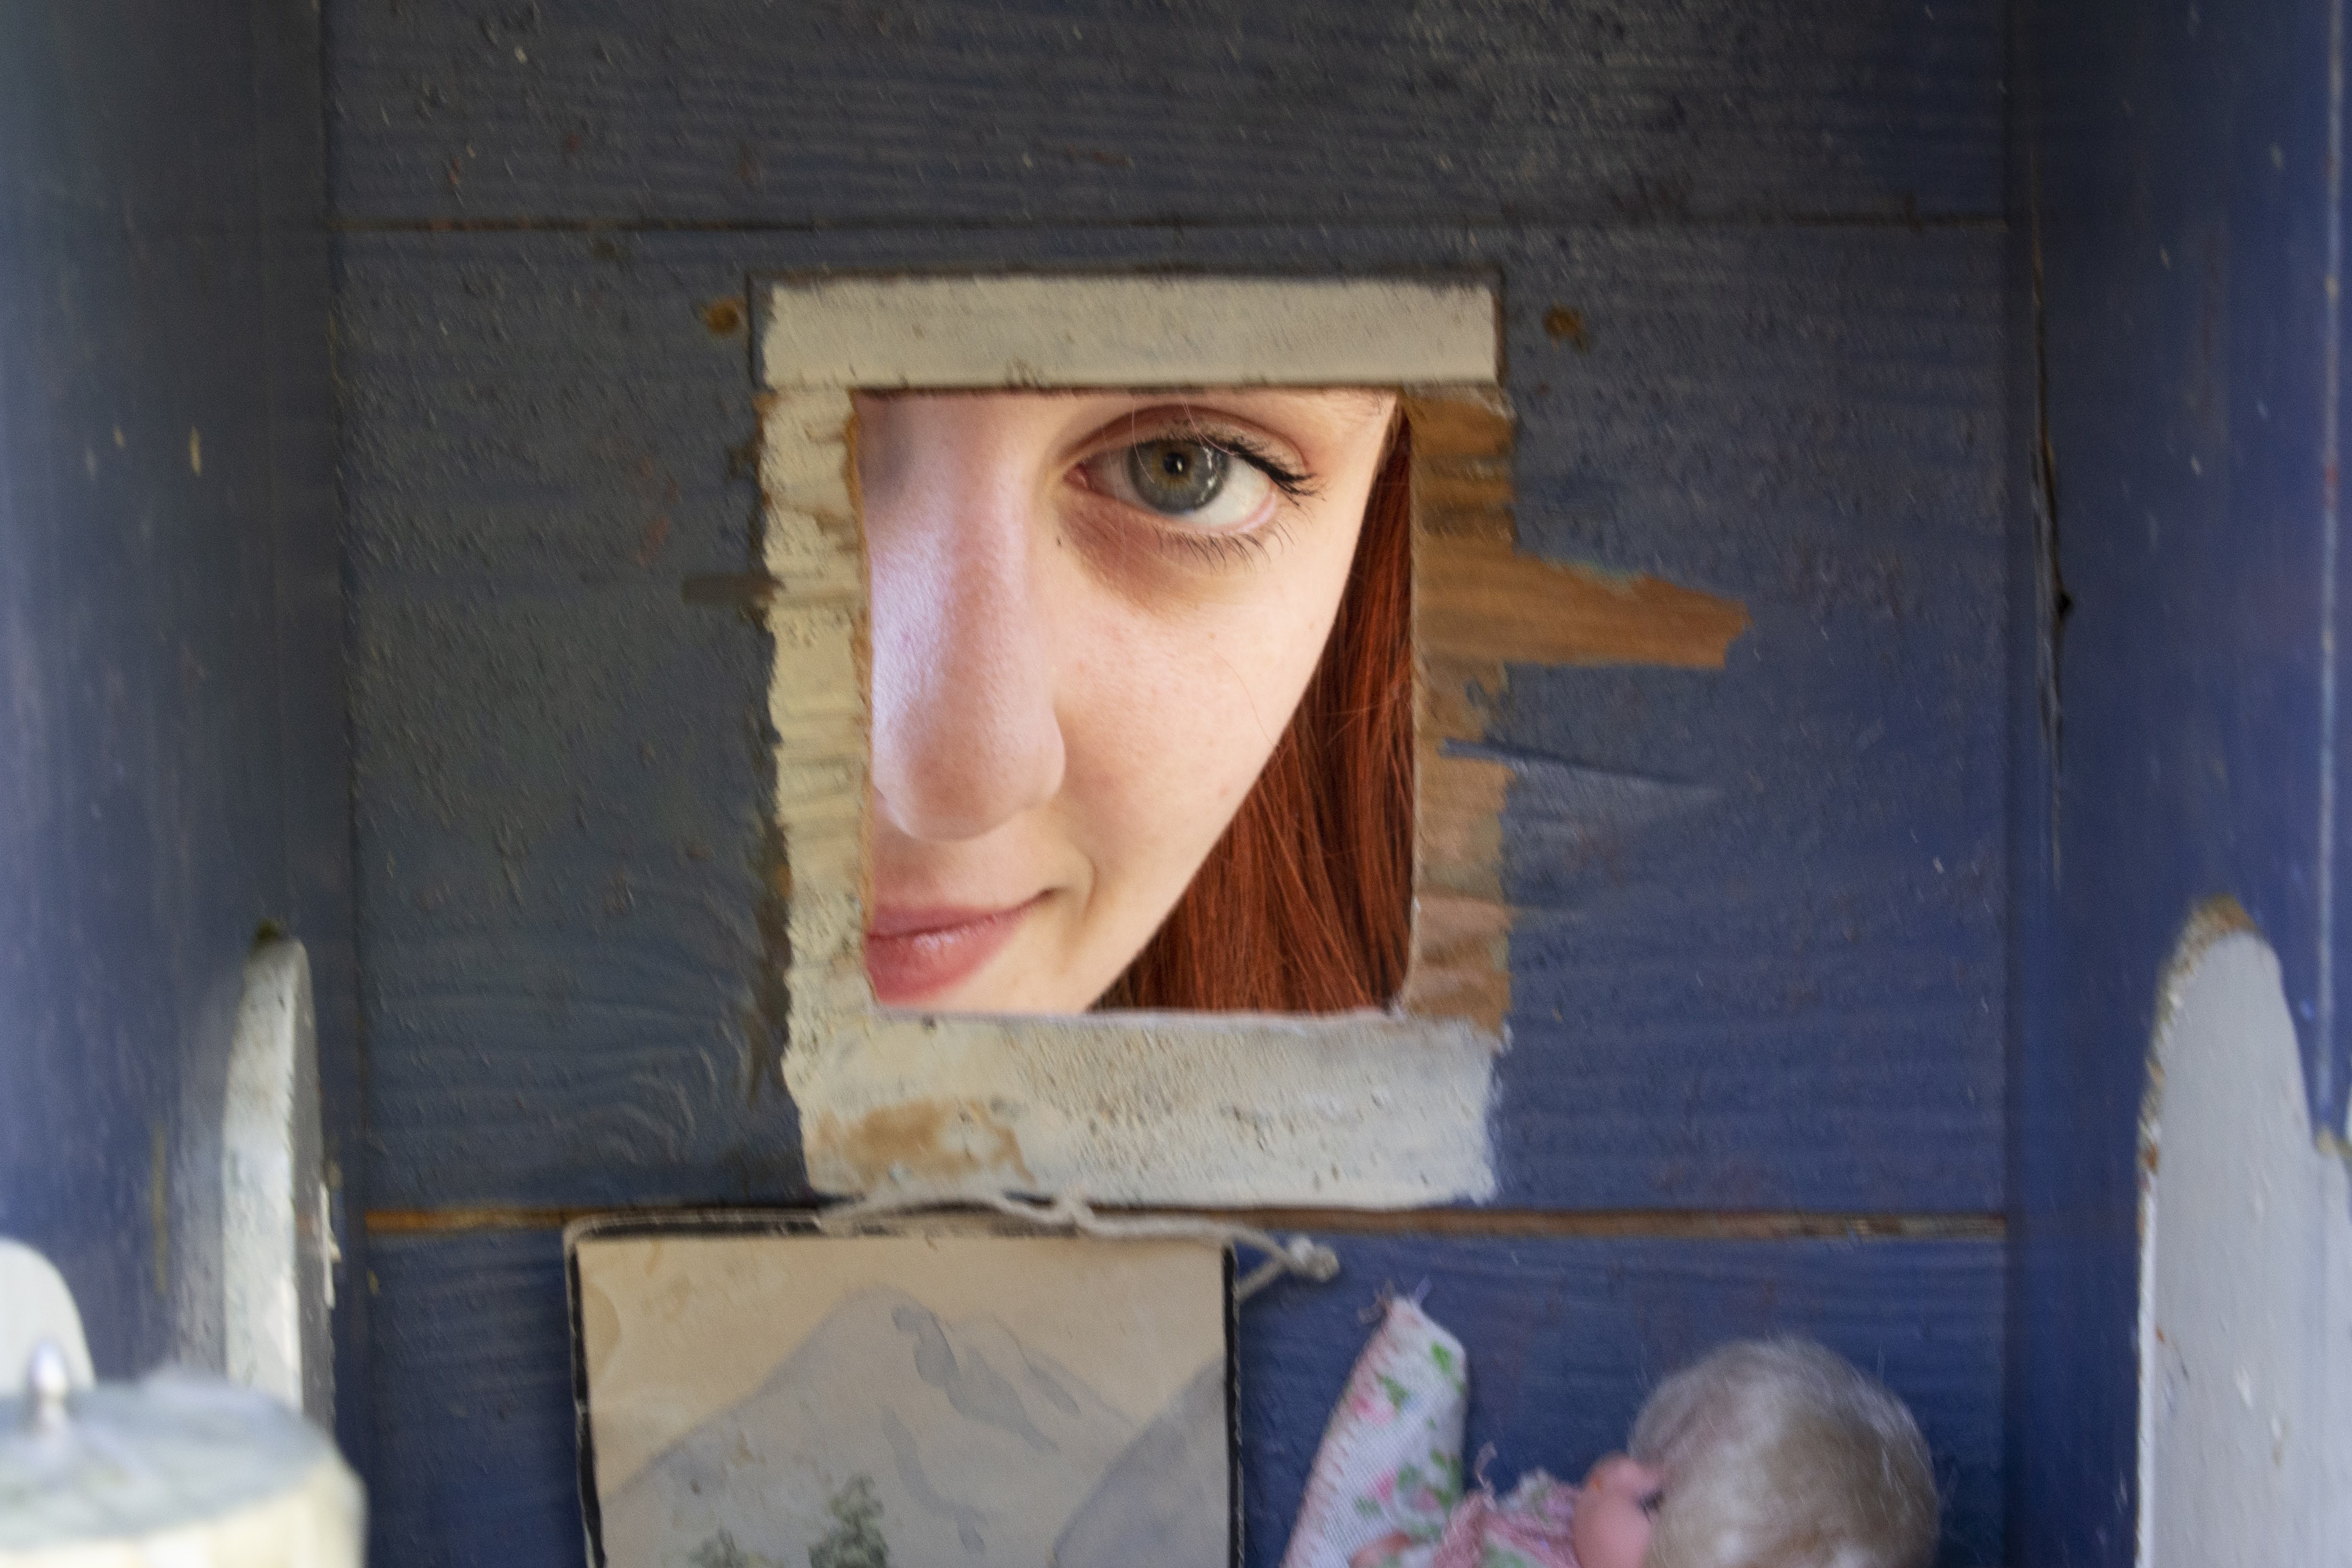 A red-haired woman peers through the window of a blue-walled dollhouse from the outside. Only her eye and a portion of her nose are visible. Below her, in the dollhouse, a doll sleeps in a bed.